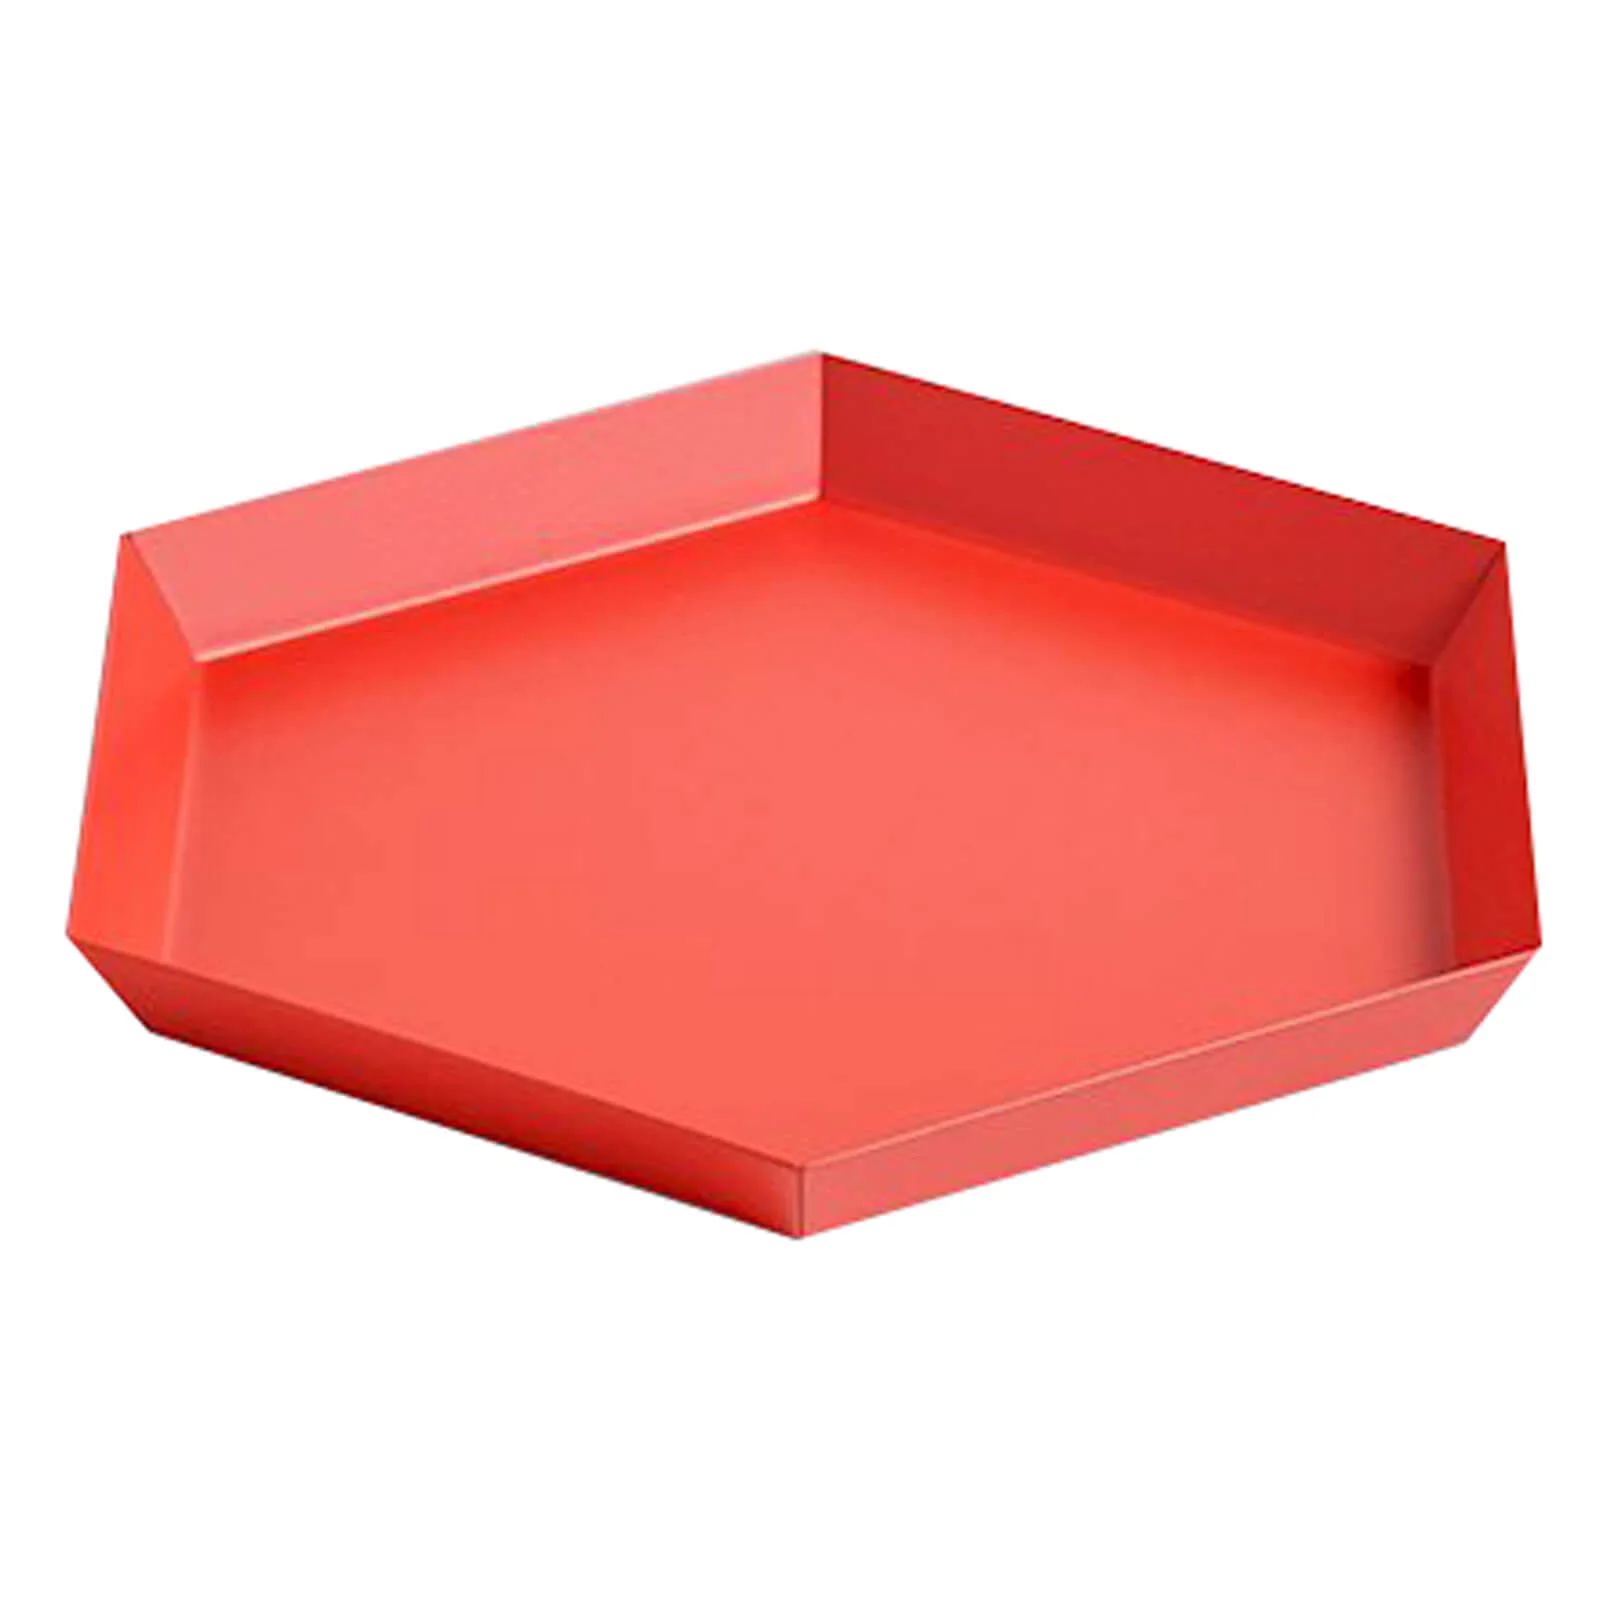 HAY Kaleido Tray - Small - Red Image 1